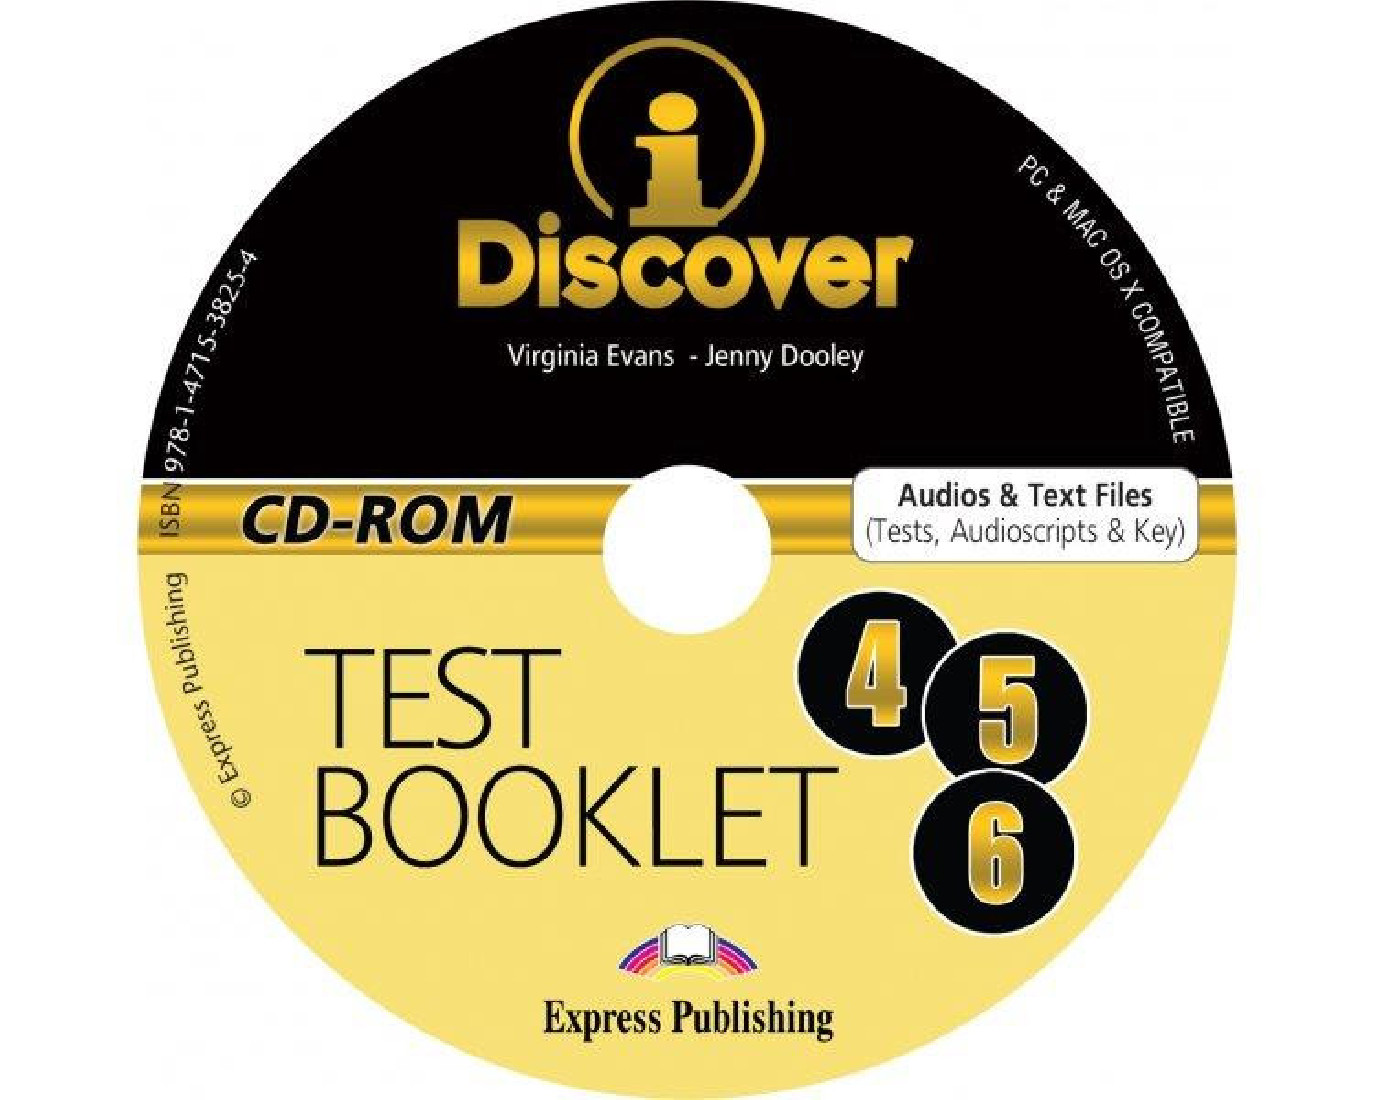 iDISCOVER 4-6 TEST BOOKLET CD-ROM